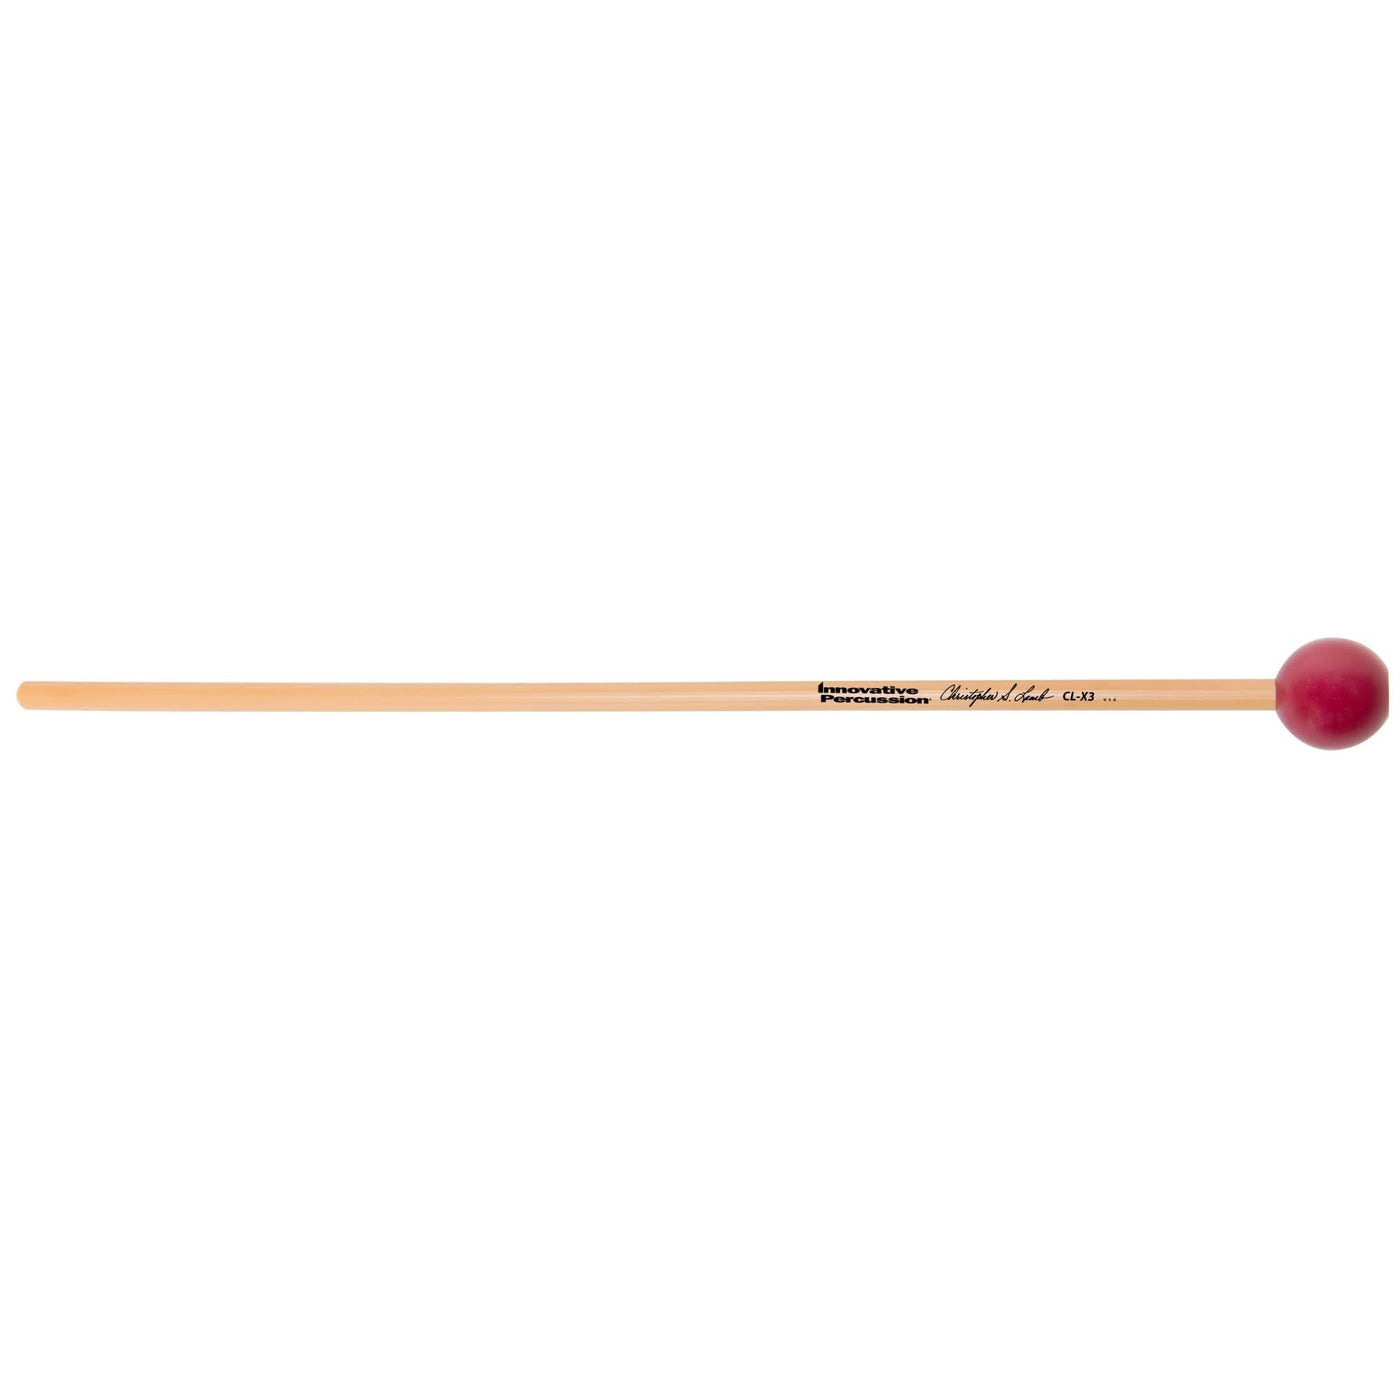 Innovative Percussion CL-X3 Keyboard Mallet